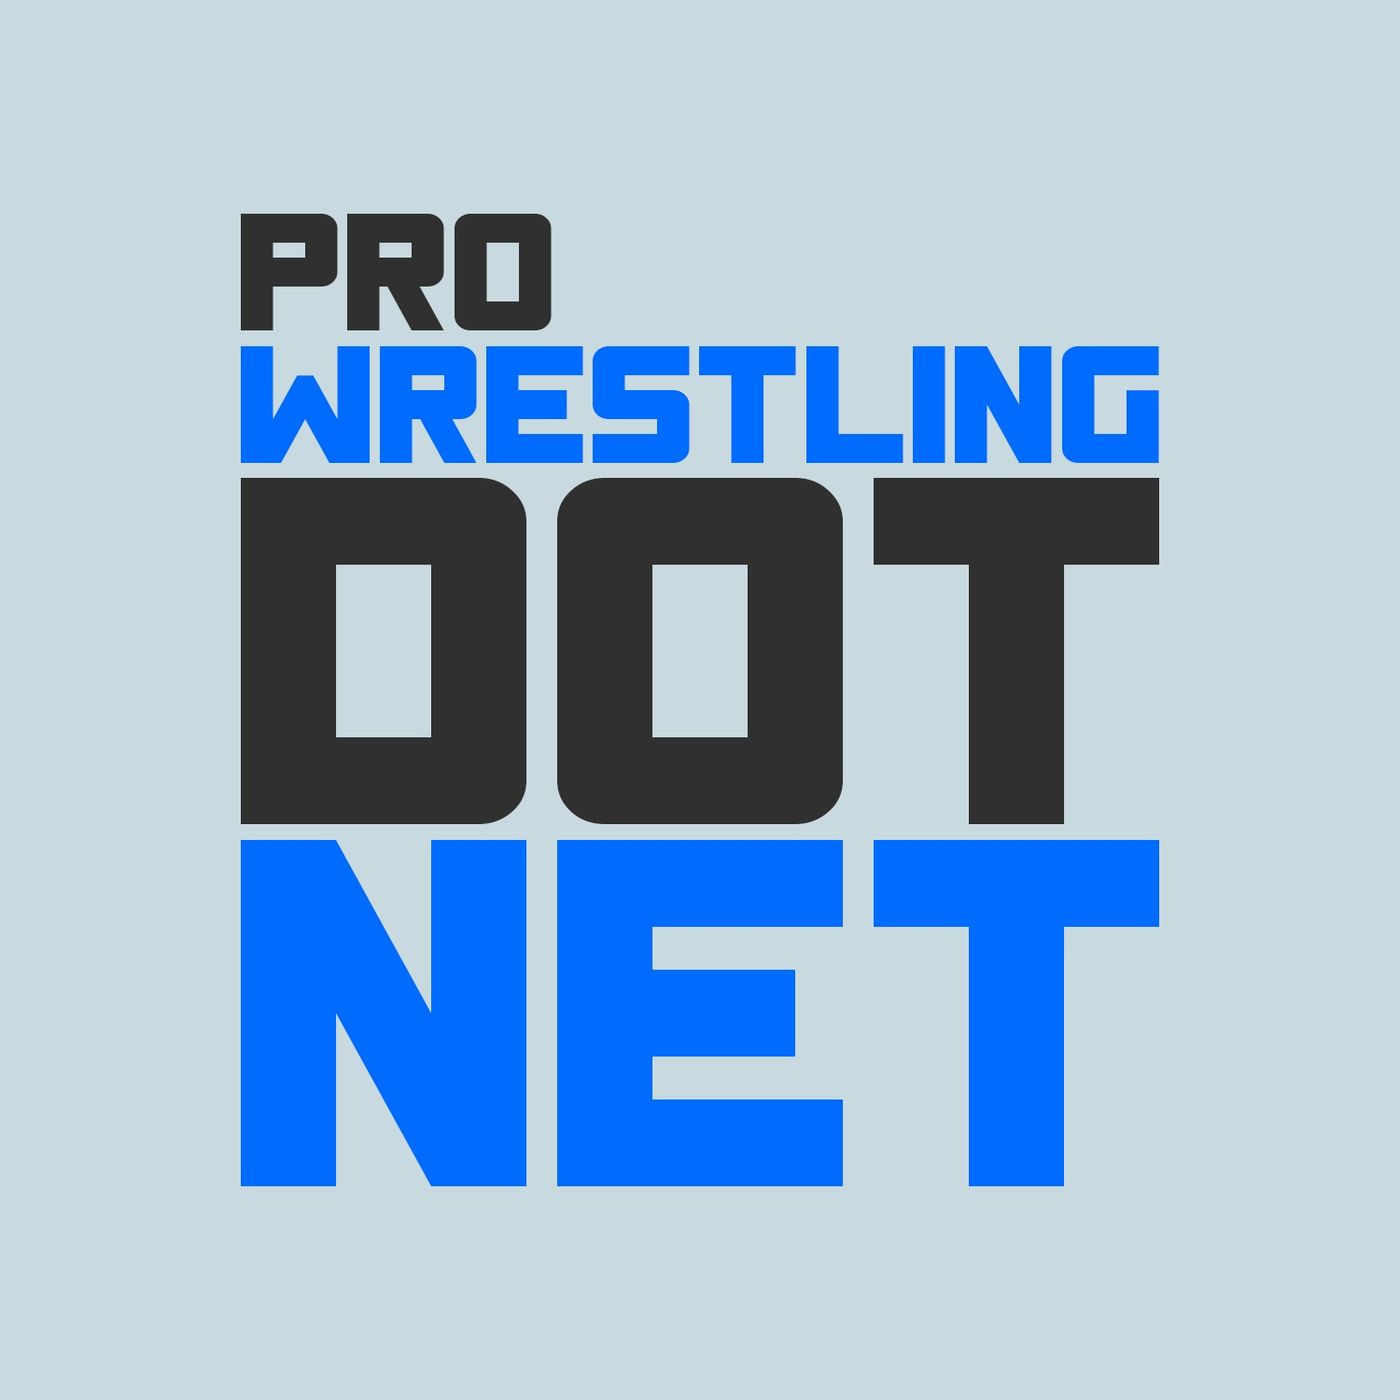 04/04 ProWrestling.net Free Podcast: AEW/ROH media call with Tony Khan discussing Friday’s ROH Supercard of Honor